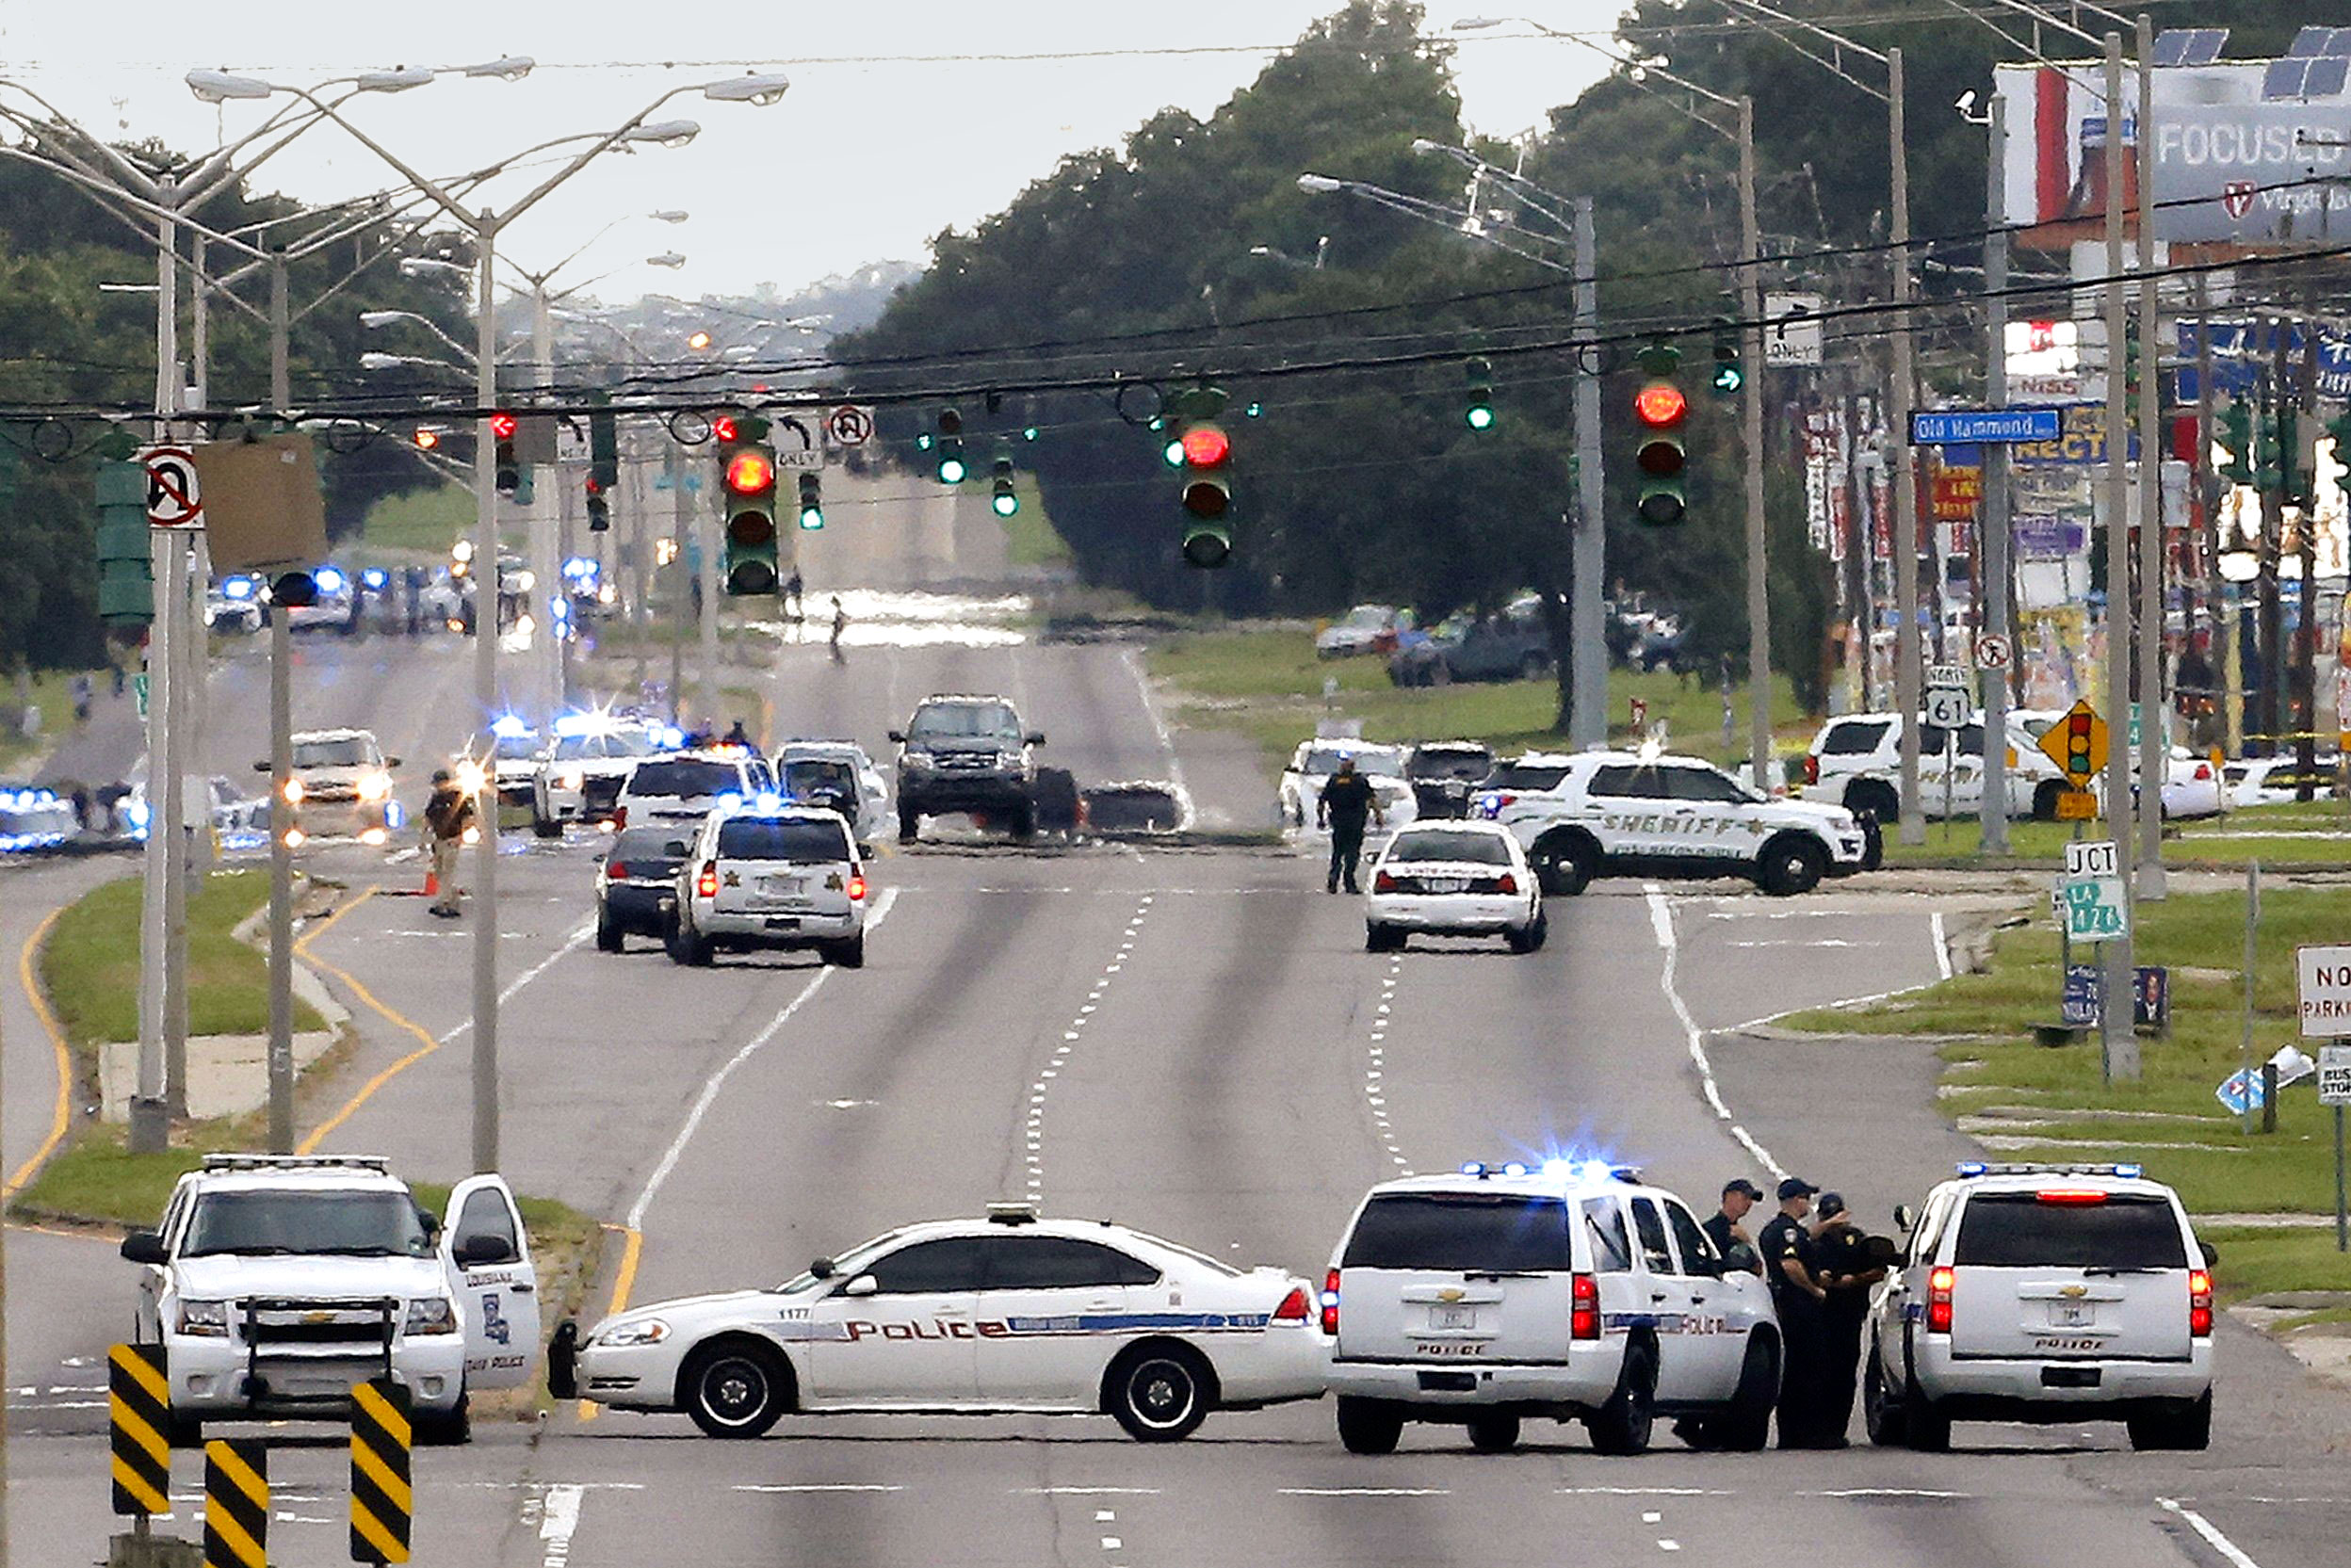 baton-rouge-suffers-deadly-police-shooting